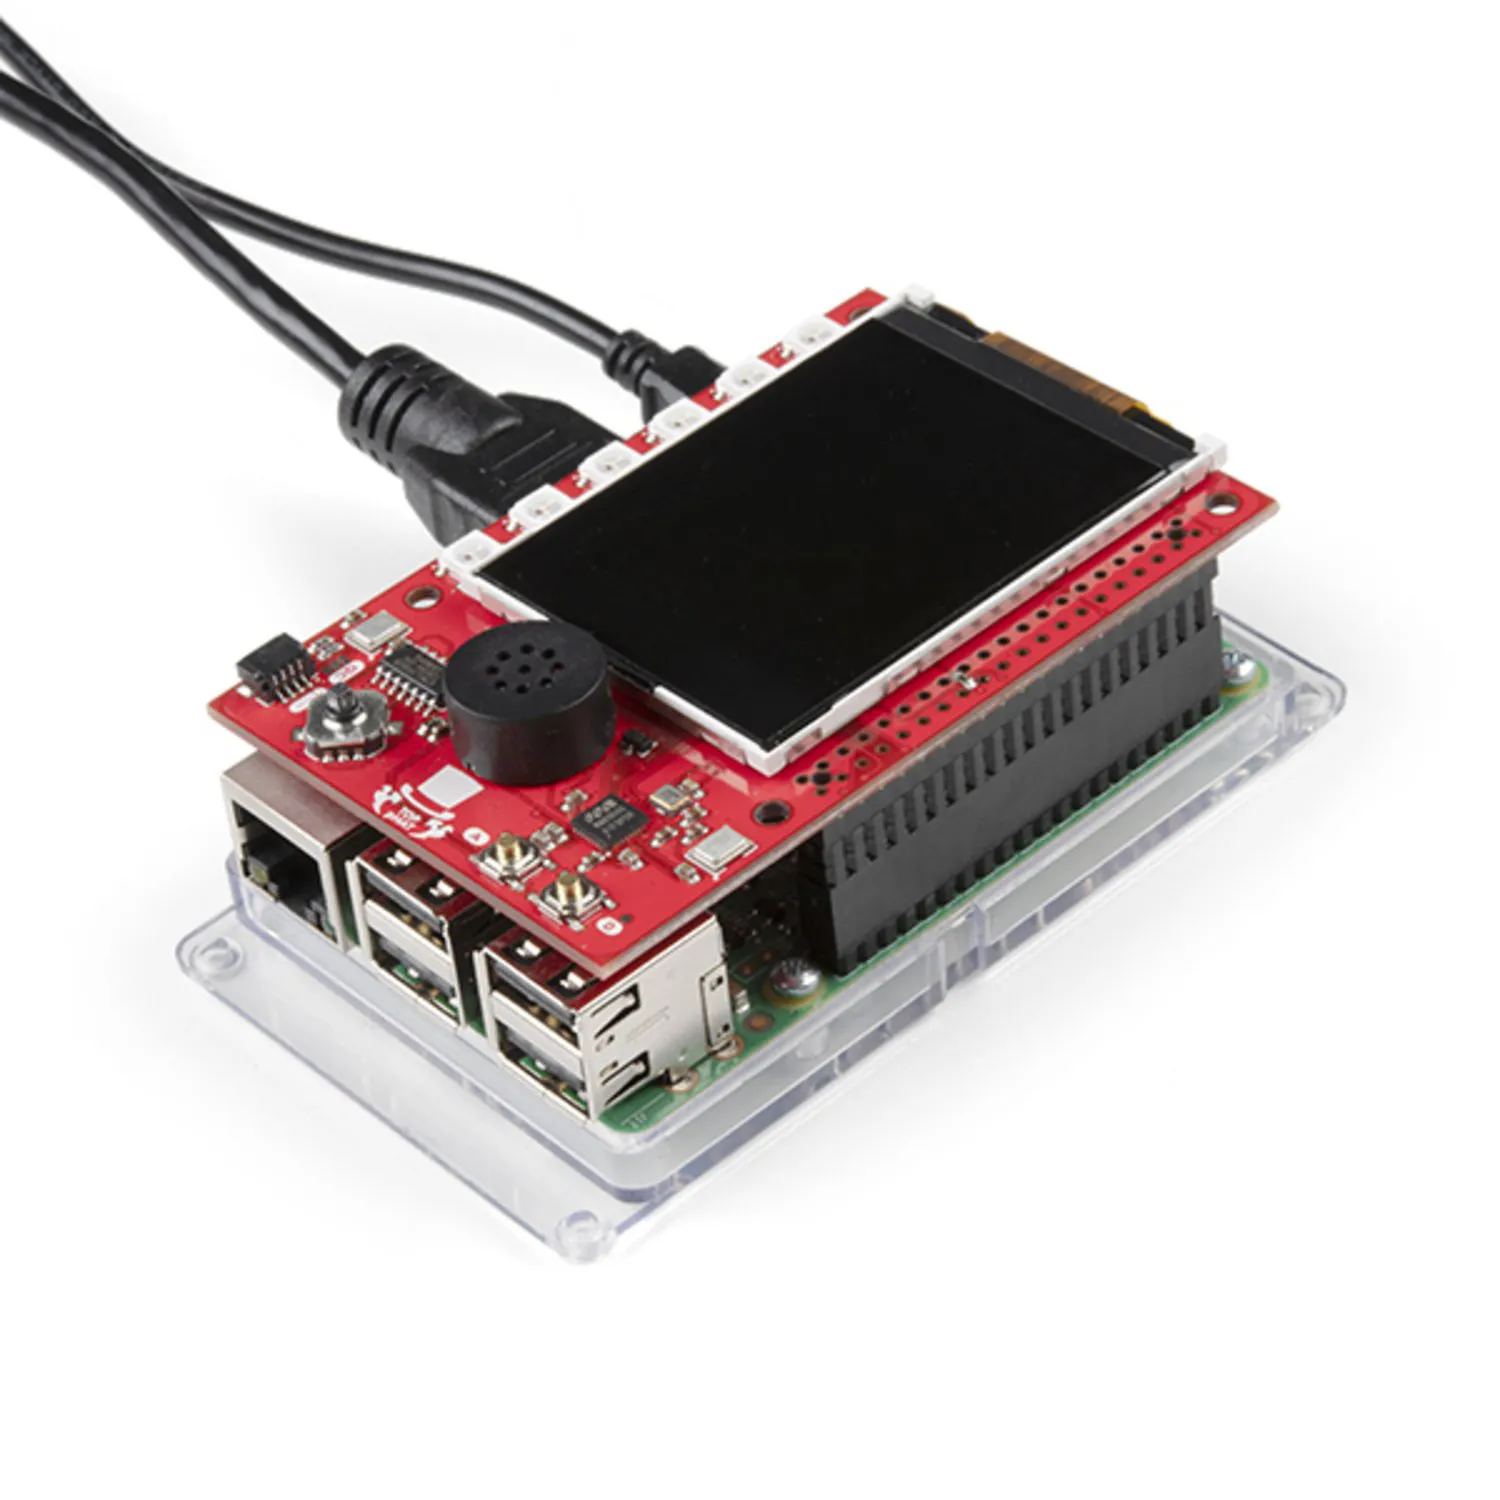 Photo of SparkFun Top pHAT for Raspberry Pi